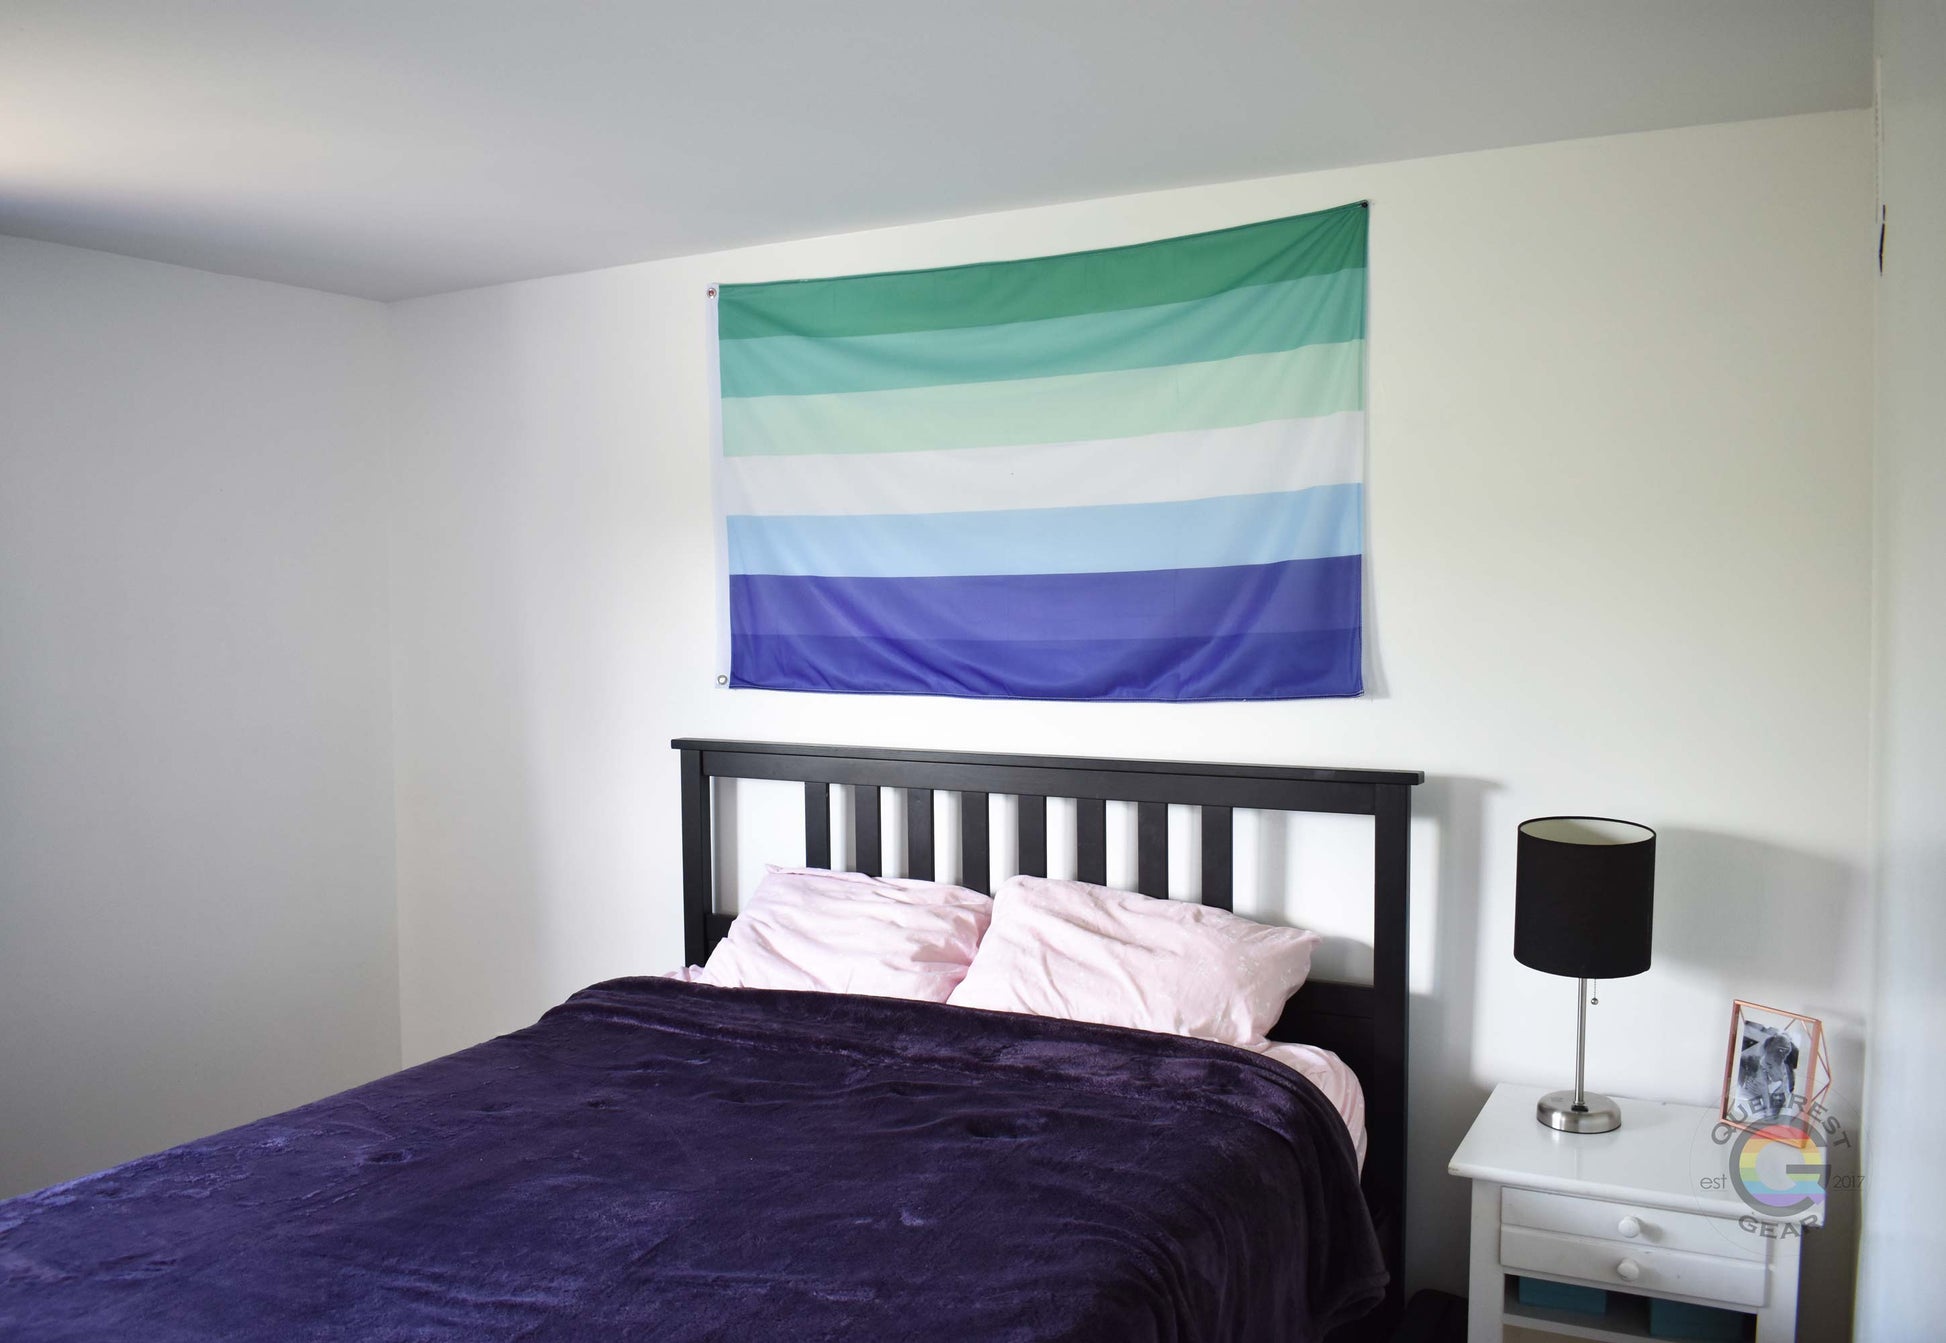 3’x5’ gay mlm pride flag hanging horizontally on the wall of a bedroom centered above a bed with a purple blanket